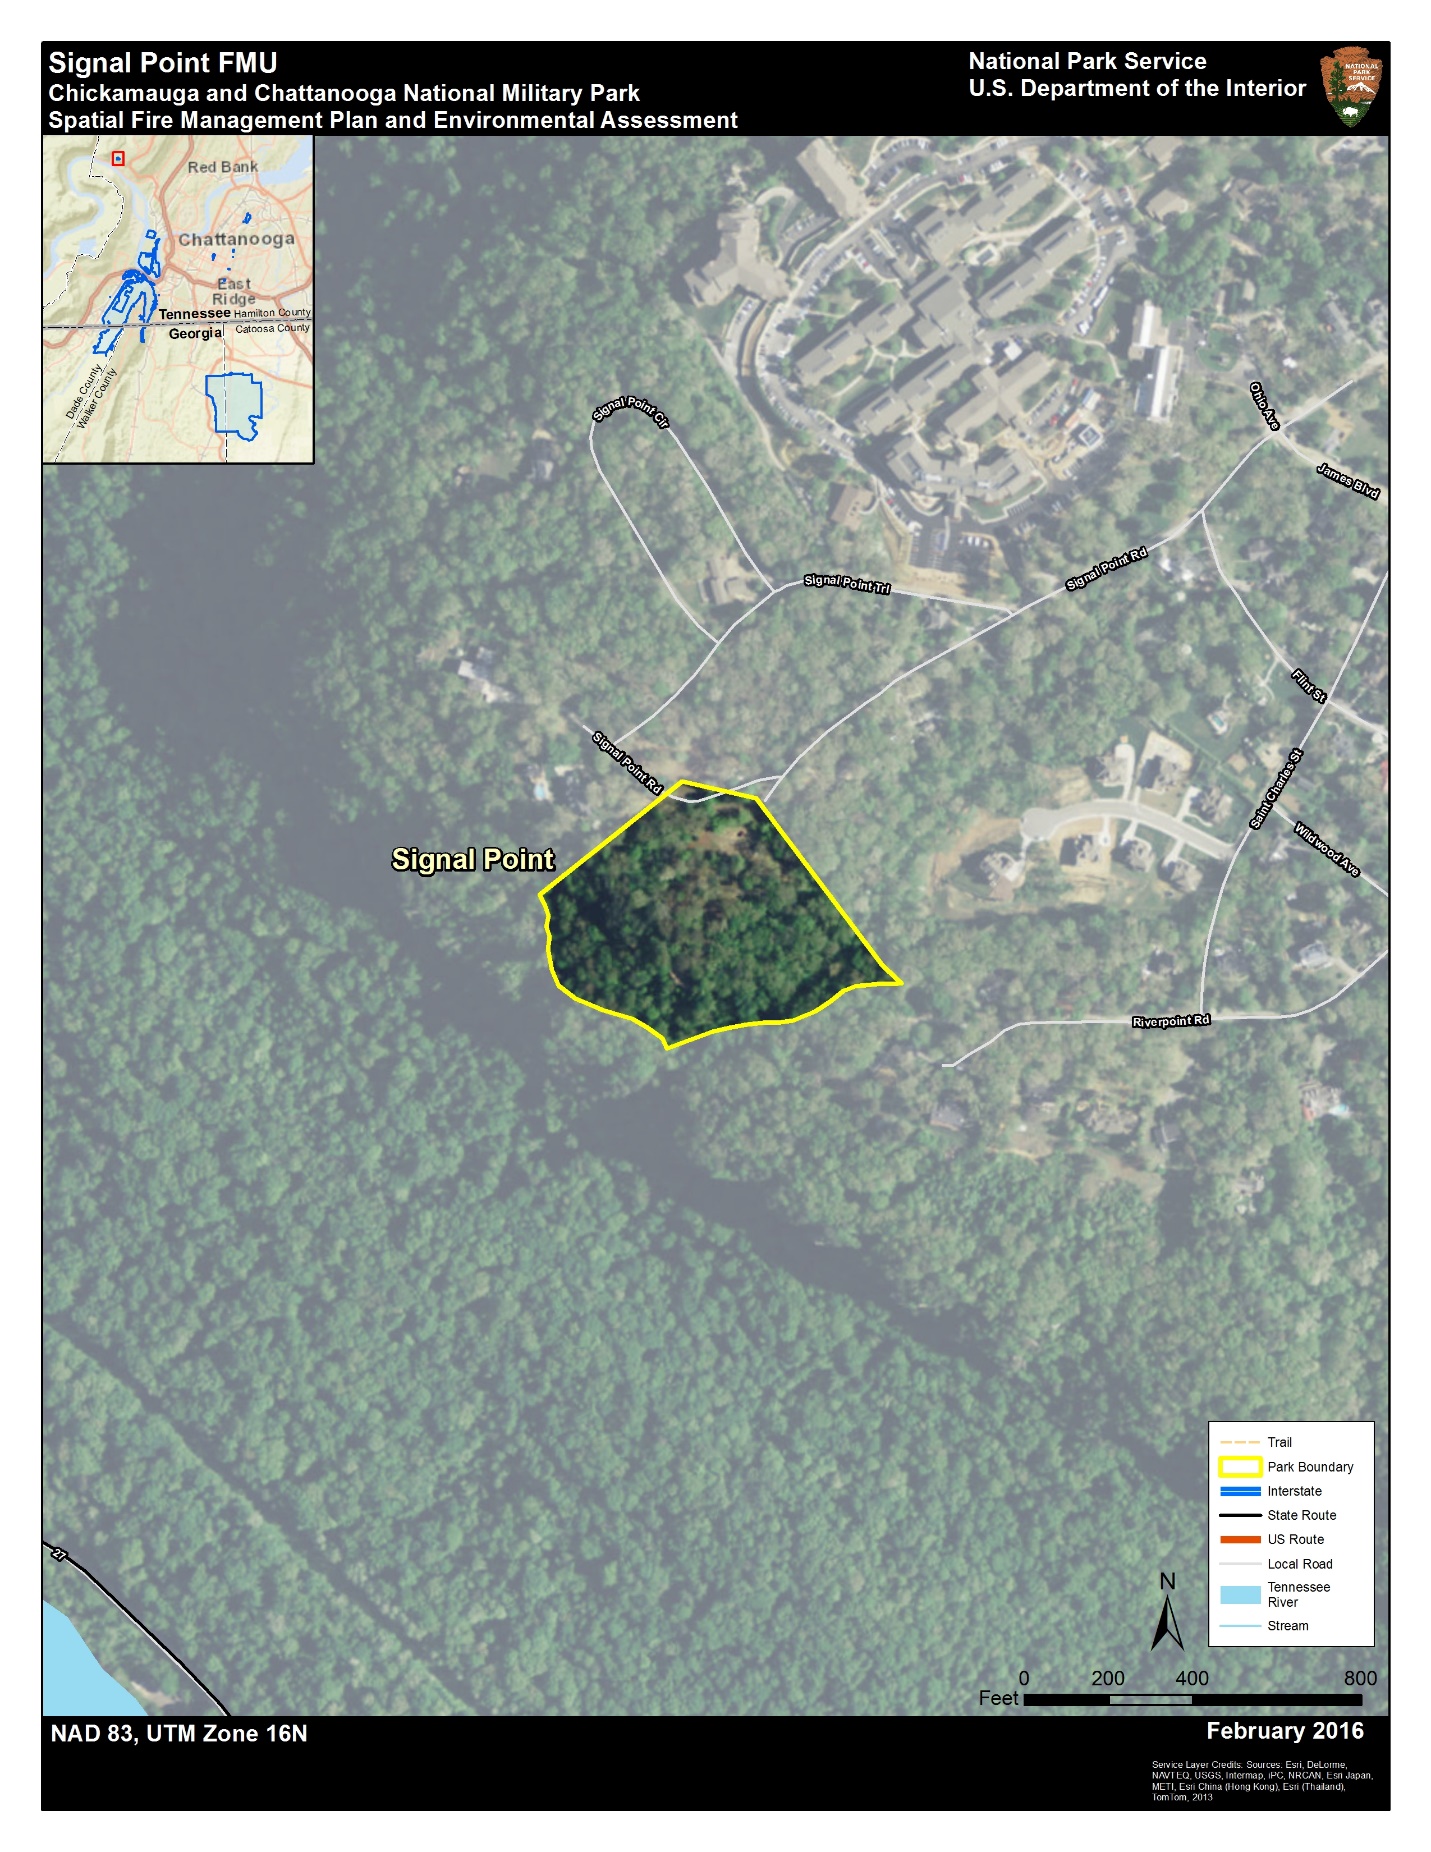 this maps shows a zoomed-in view of signal point fmu. aerial photography is the base layer for the map. signal point is the furthest north portion of the park, located adjacent to the signal mountain community, a suburb of chattanooga. the unit is primarily forested. 